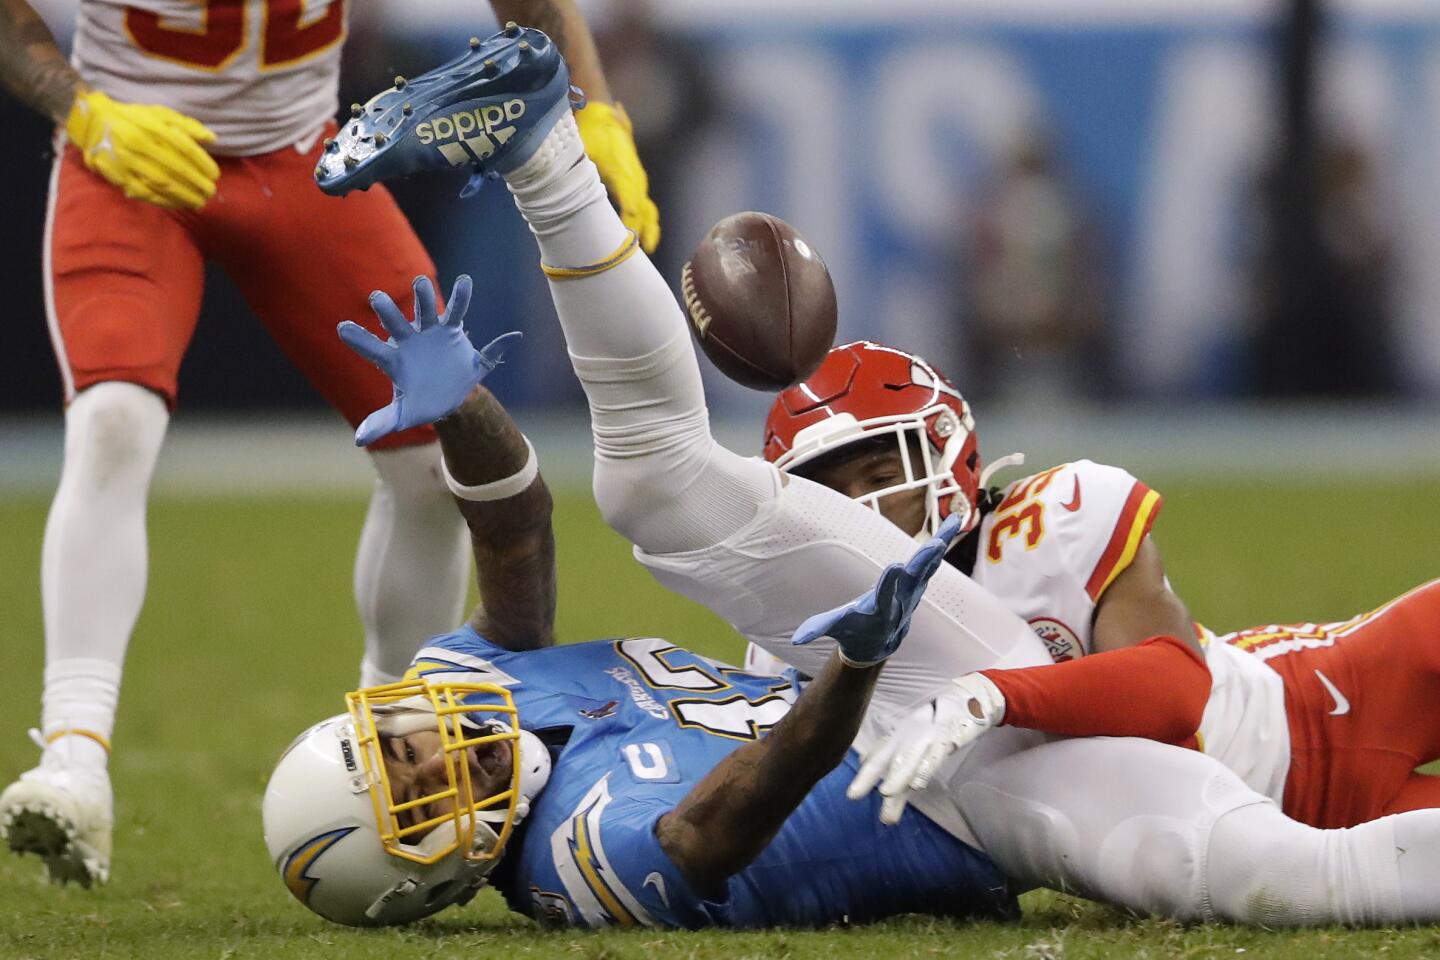 Chargers receiver Keenan Allen can't make a catch against Chiefs cornerback Charvarius Ward during a game Nov. 18 in Mexico City.